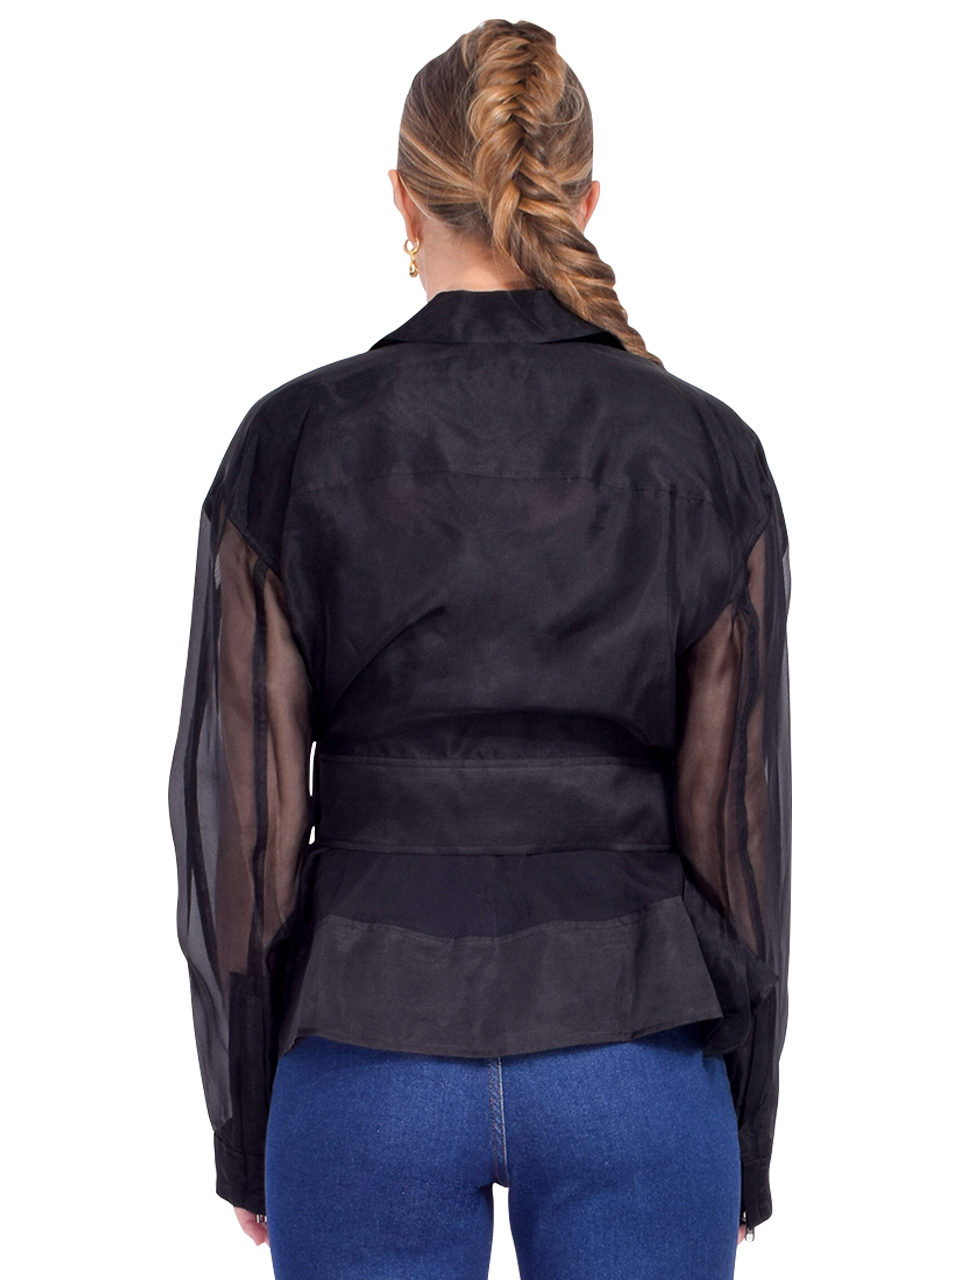 3.1 Phillip Lim Organza Belted Flounce Utility Jacket in Black Back View 